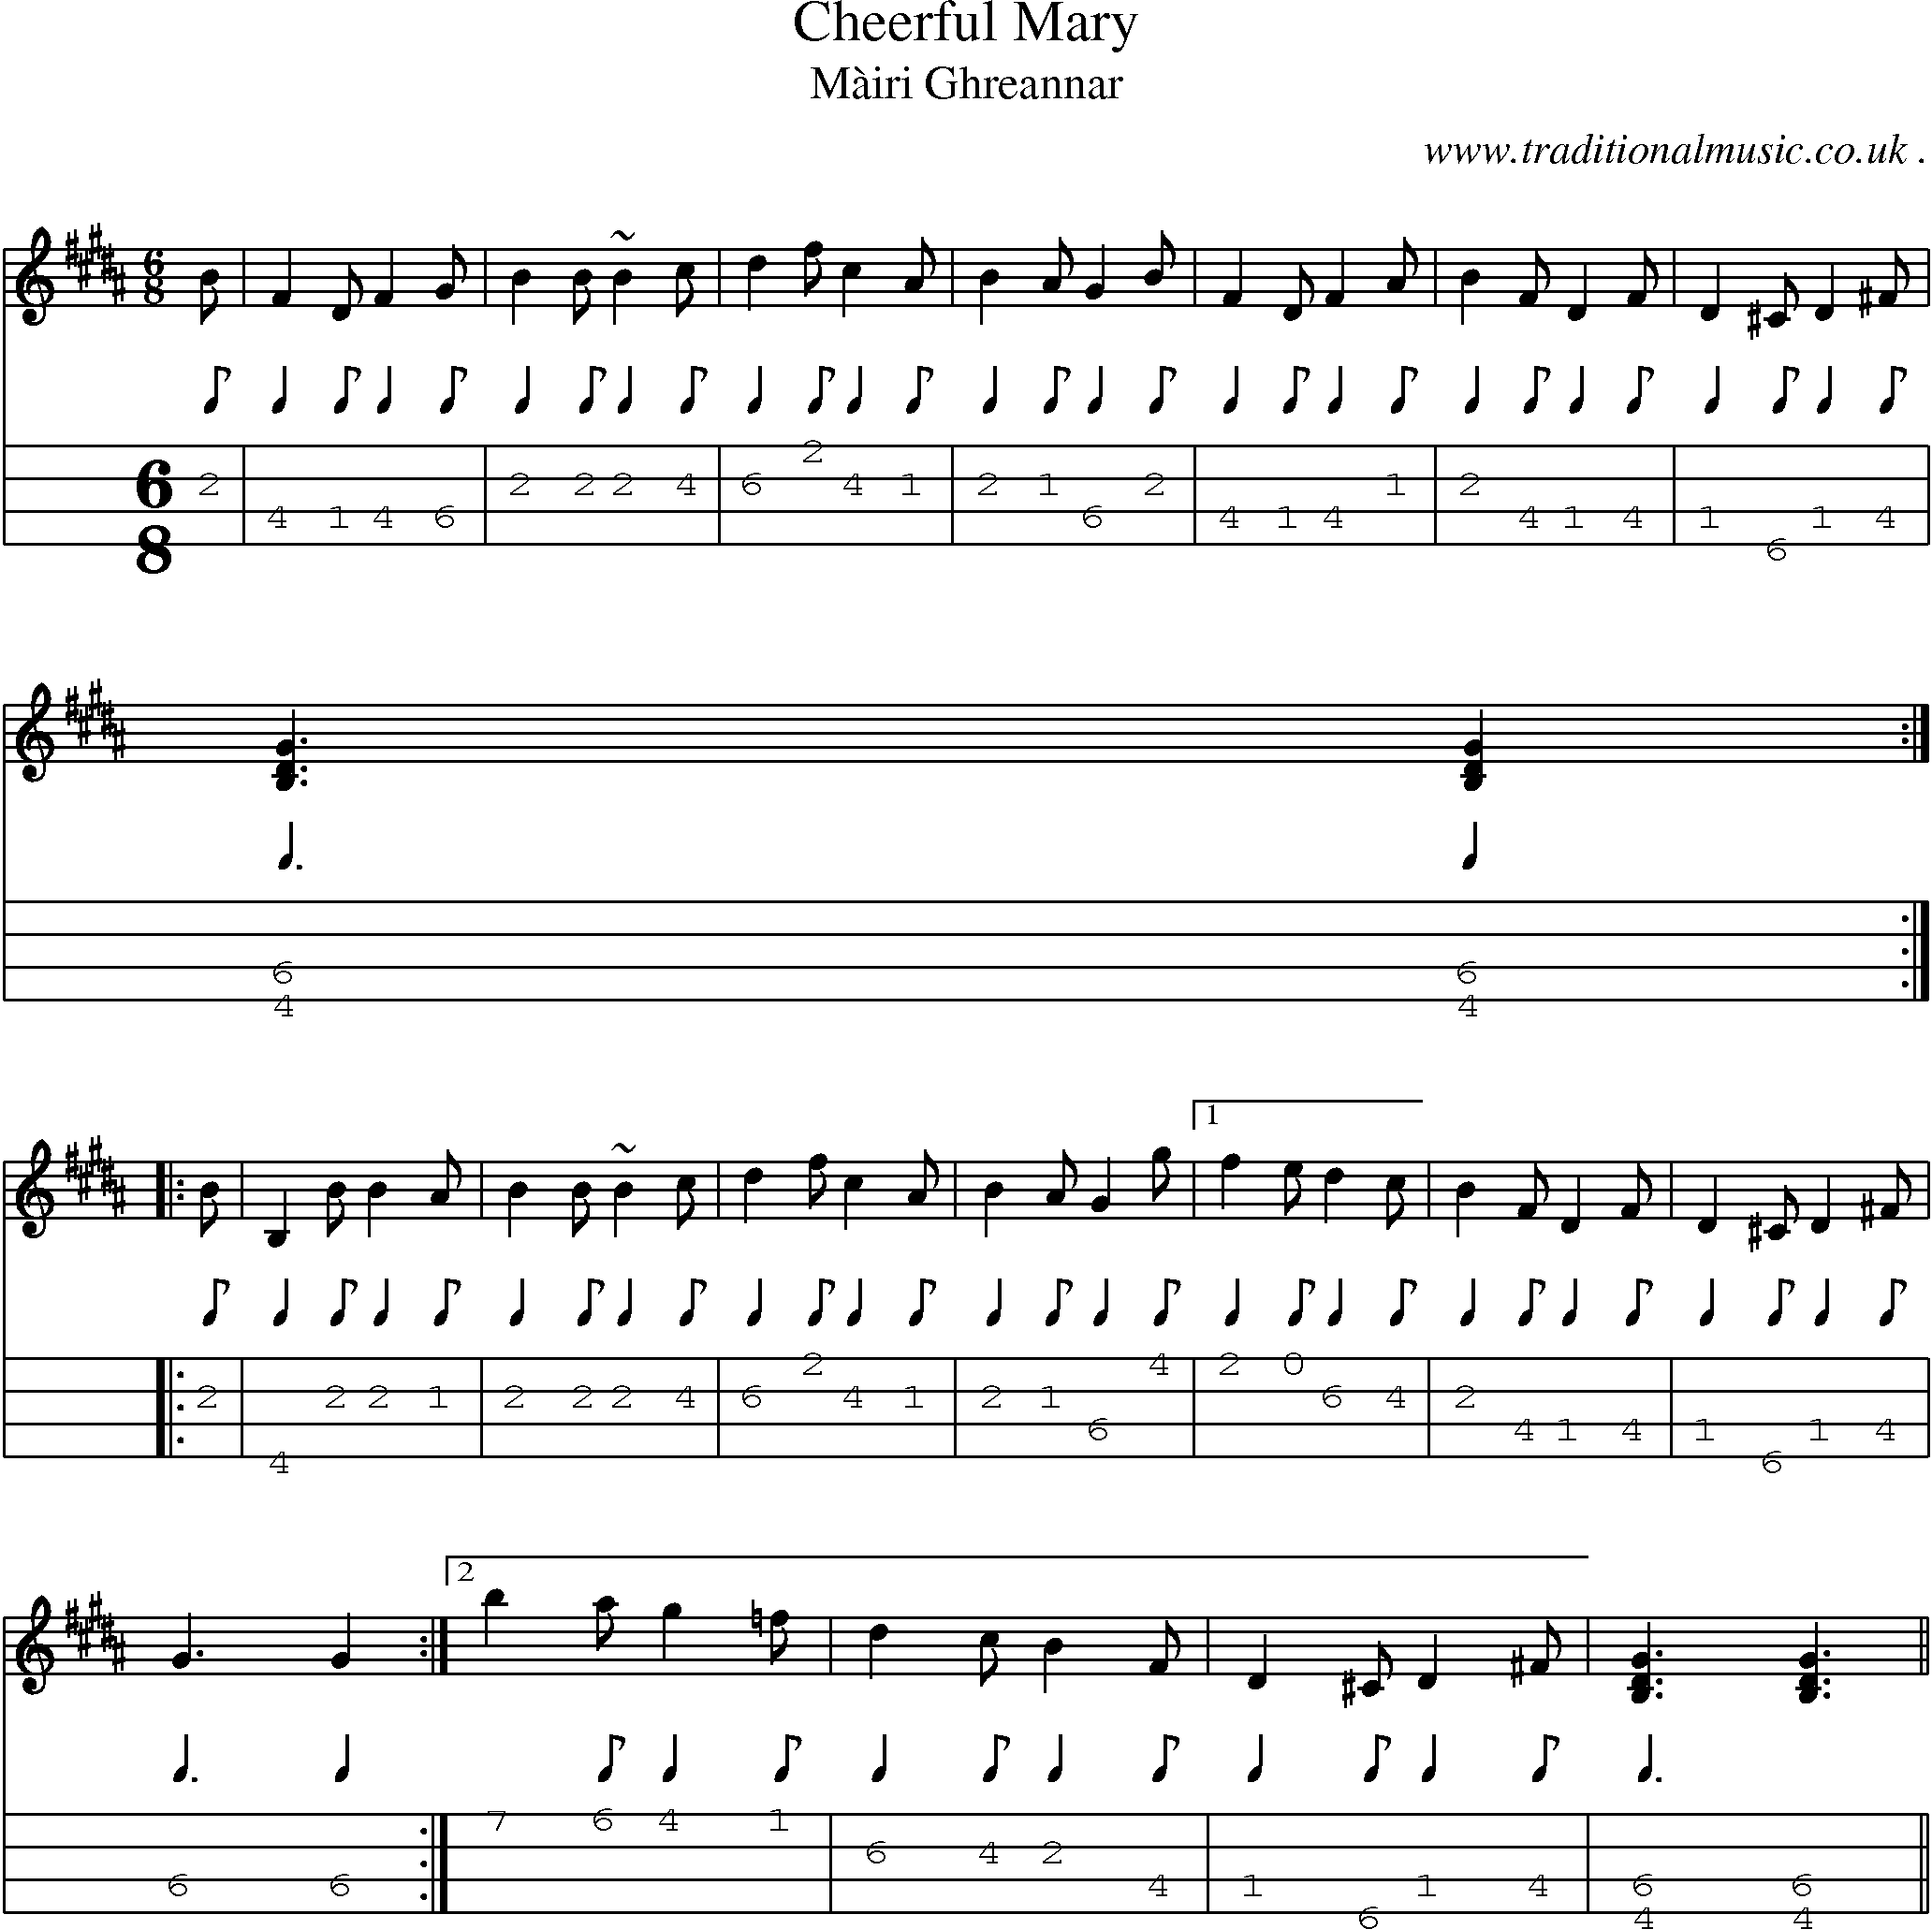 Sheet-music  score, Chords and Mandolin Tabs for Cheerful Mary